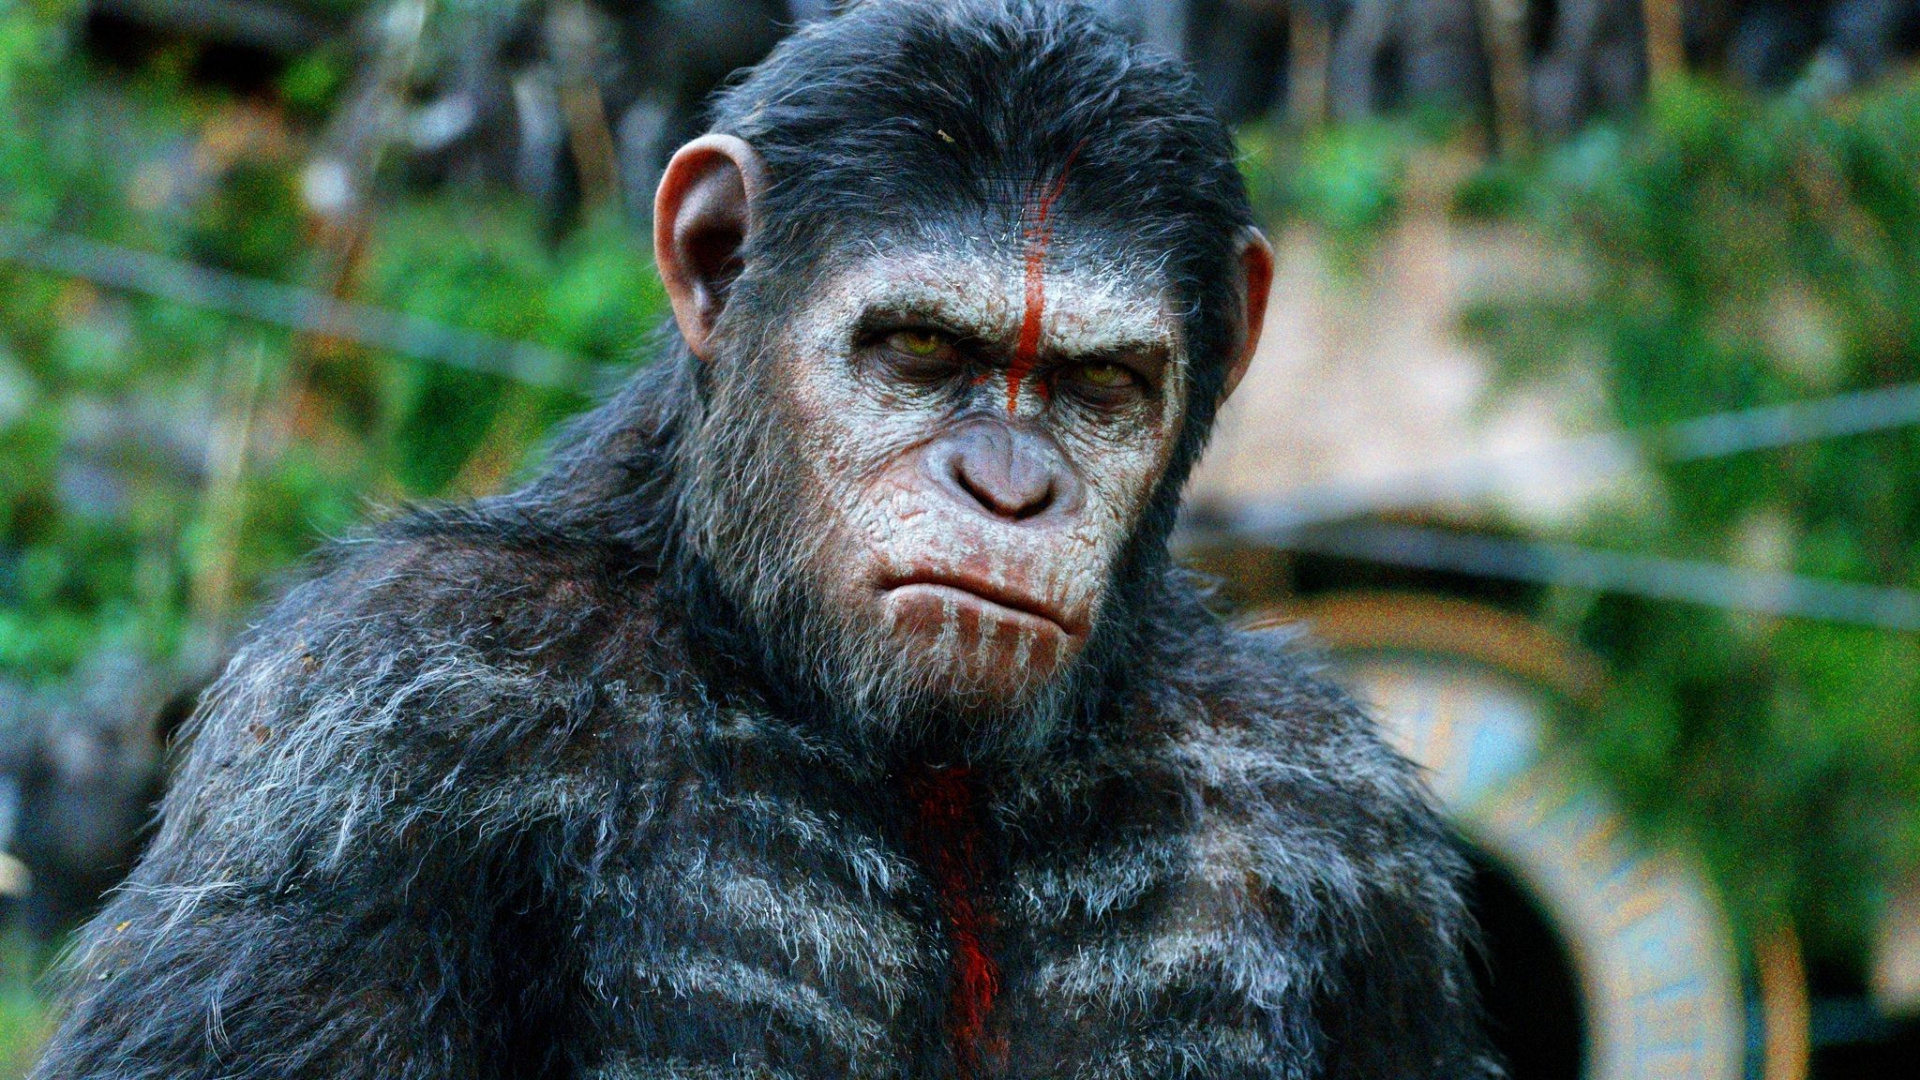 Planet of the Apes, Free download, HD wallpapers, Desktop and tablet, 1920x1080 Full HD Desktop